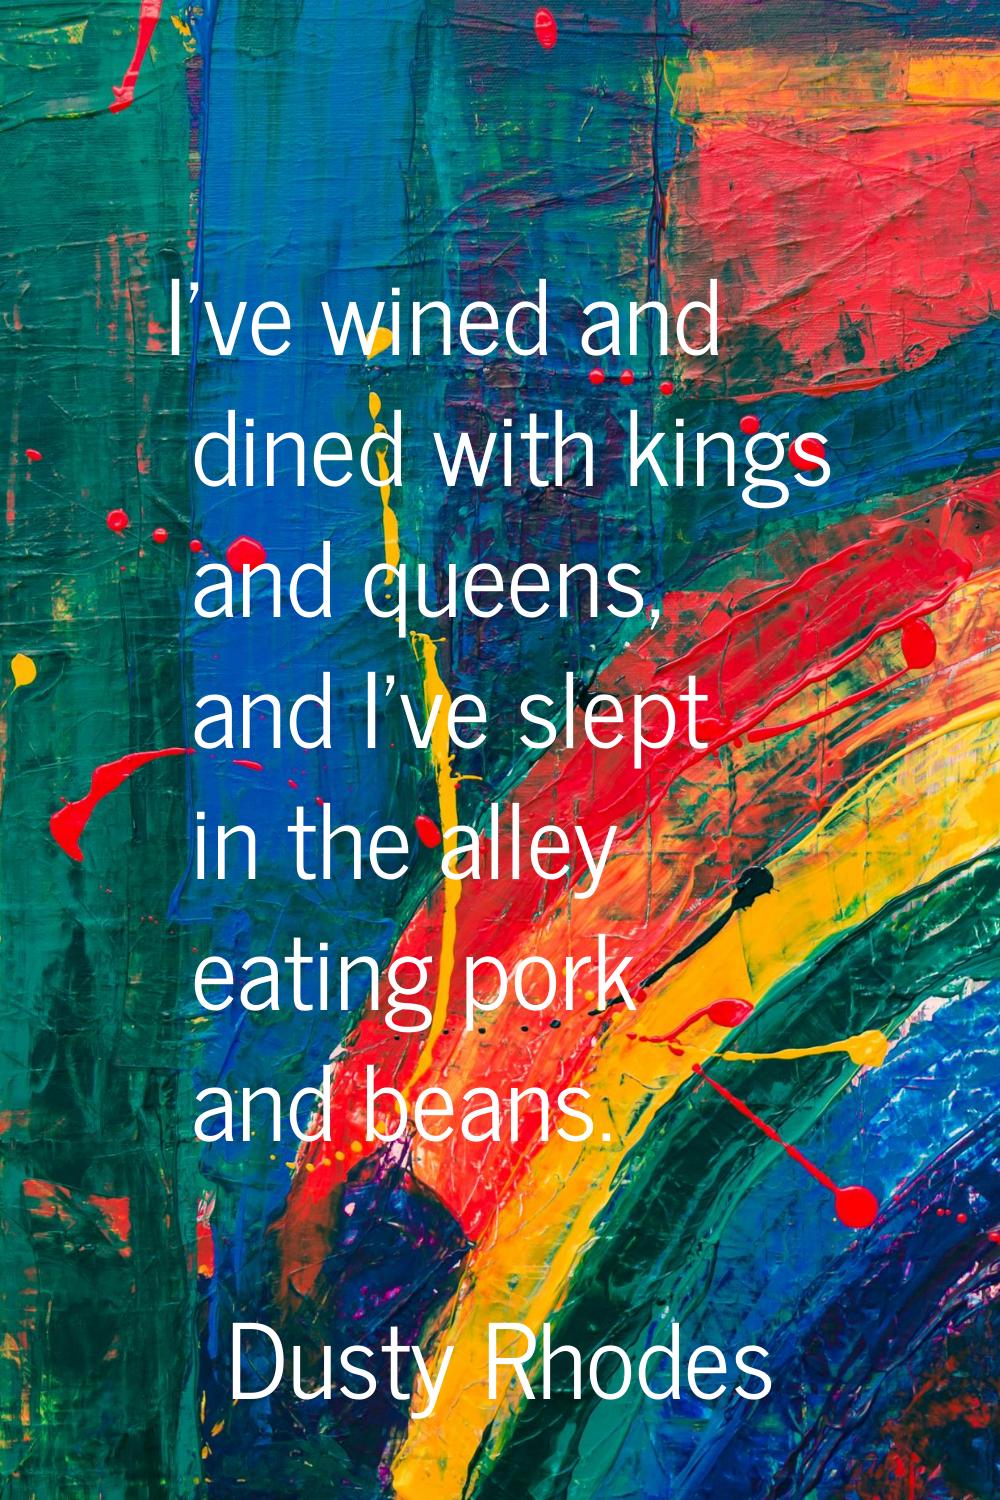 I've wined and dined with kings and queens, and I've slept in the alley eating pork and beans.